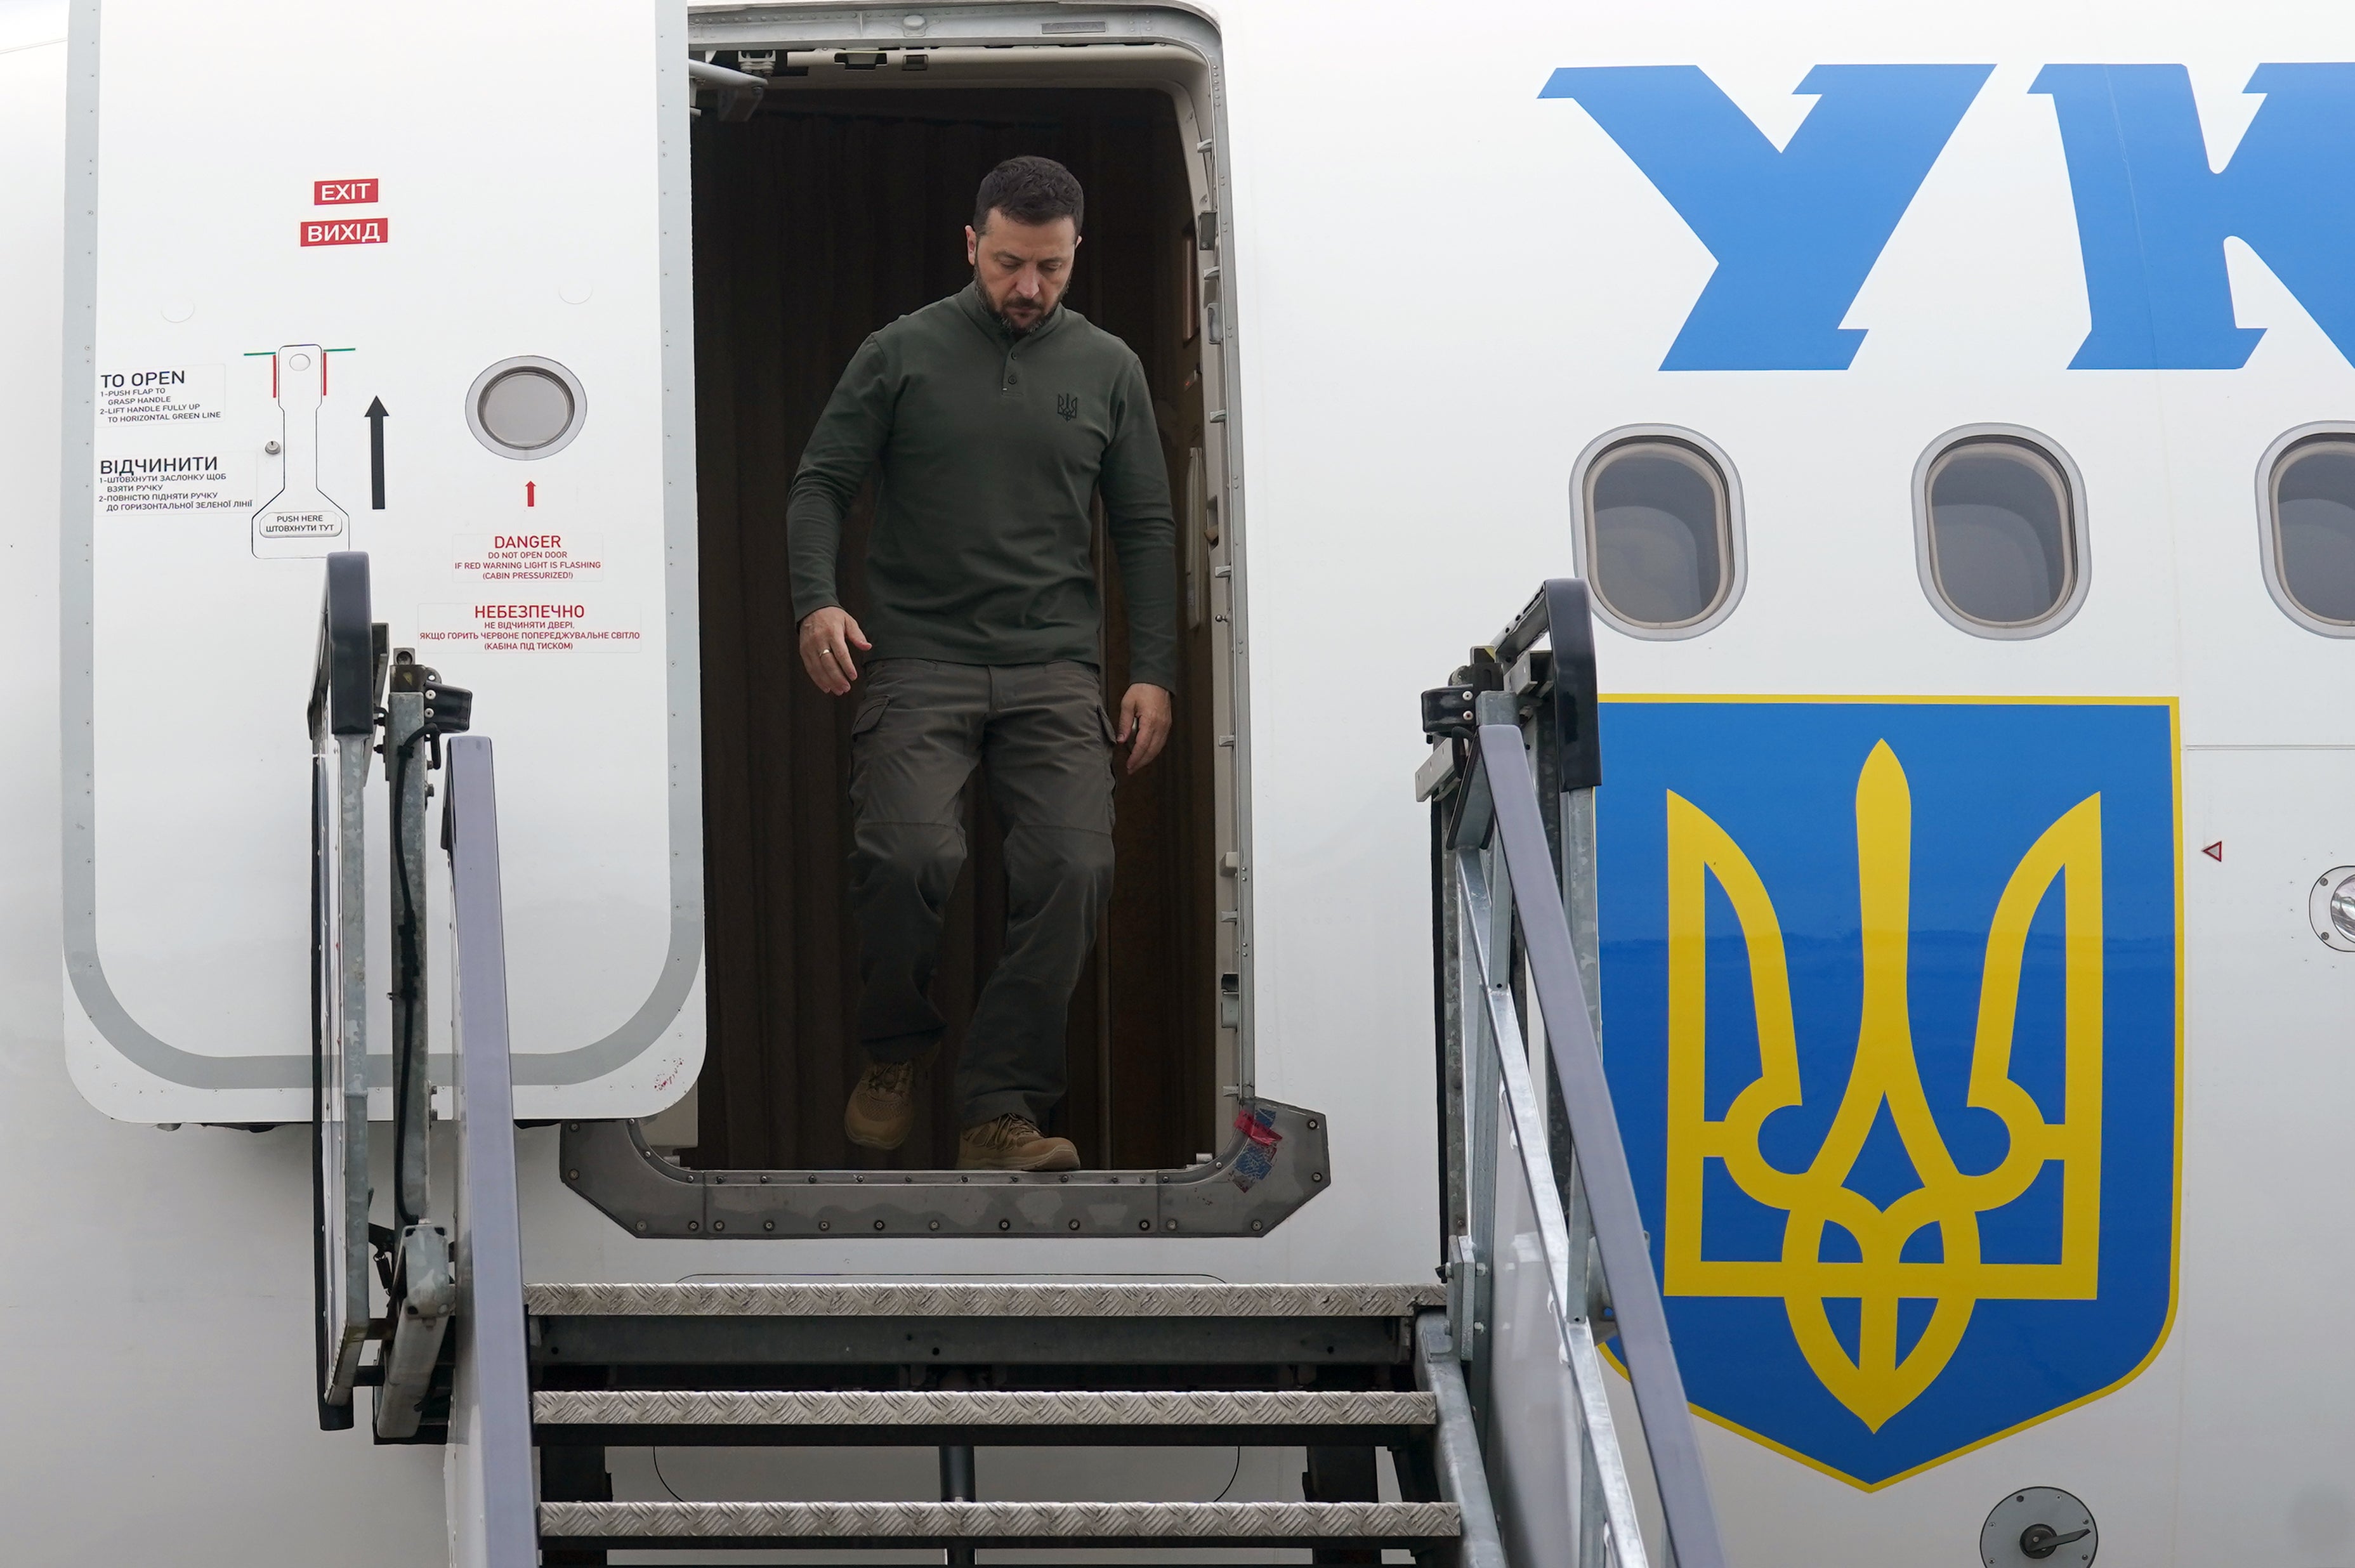 Ukrainian President Volodymyr Zelensky arrives at Shannon Airport in County Clare for a bilateral meeting with Taoiseach Simon Harris.